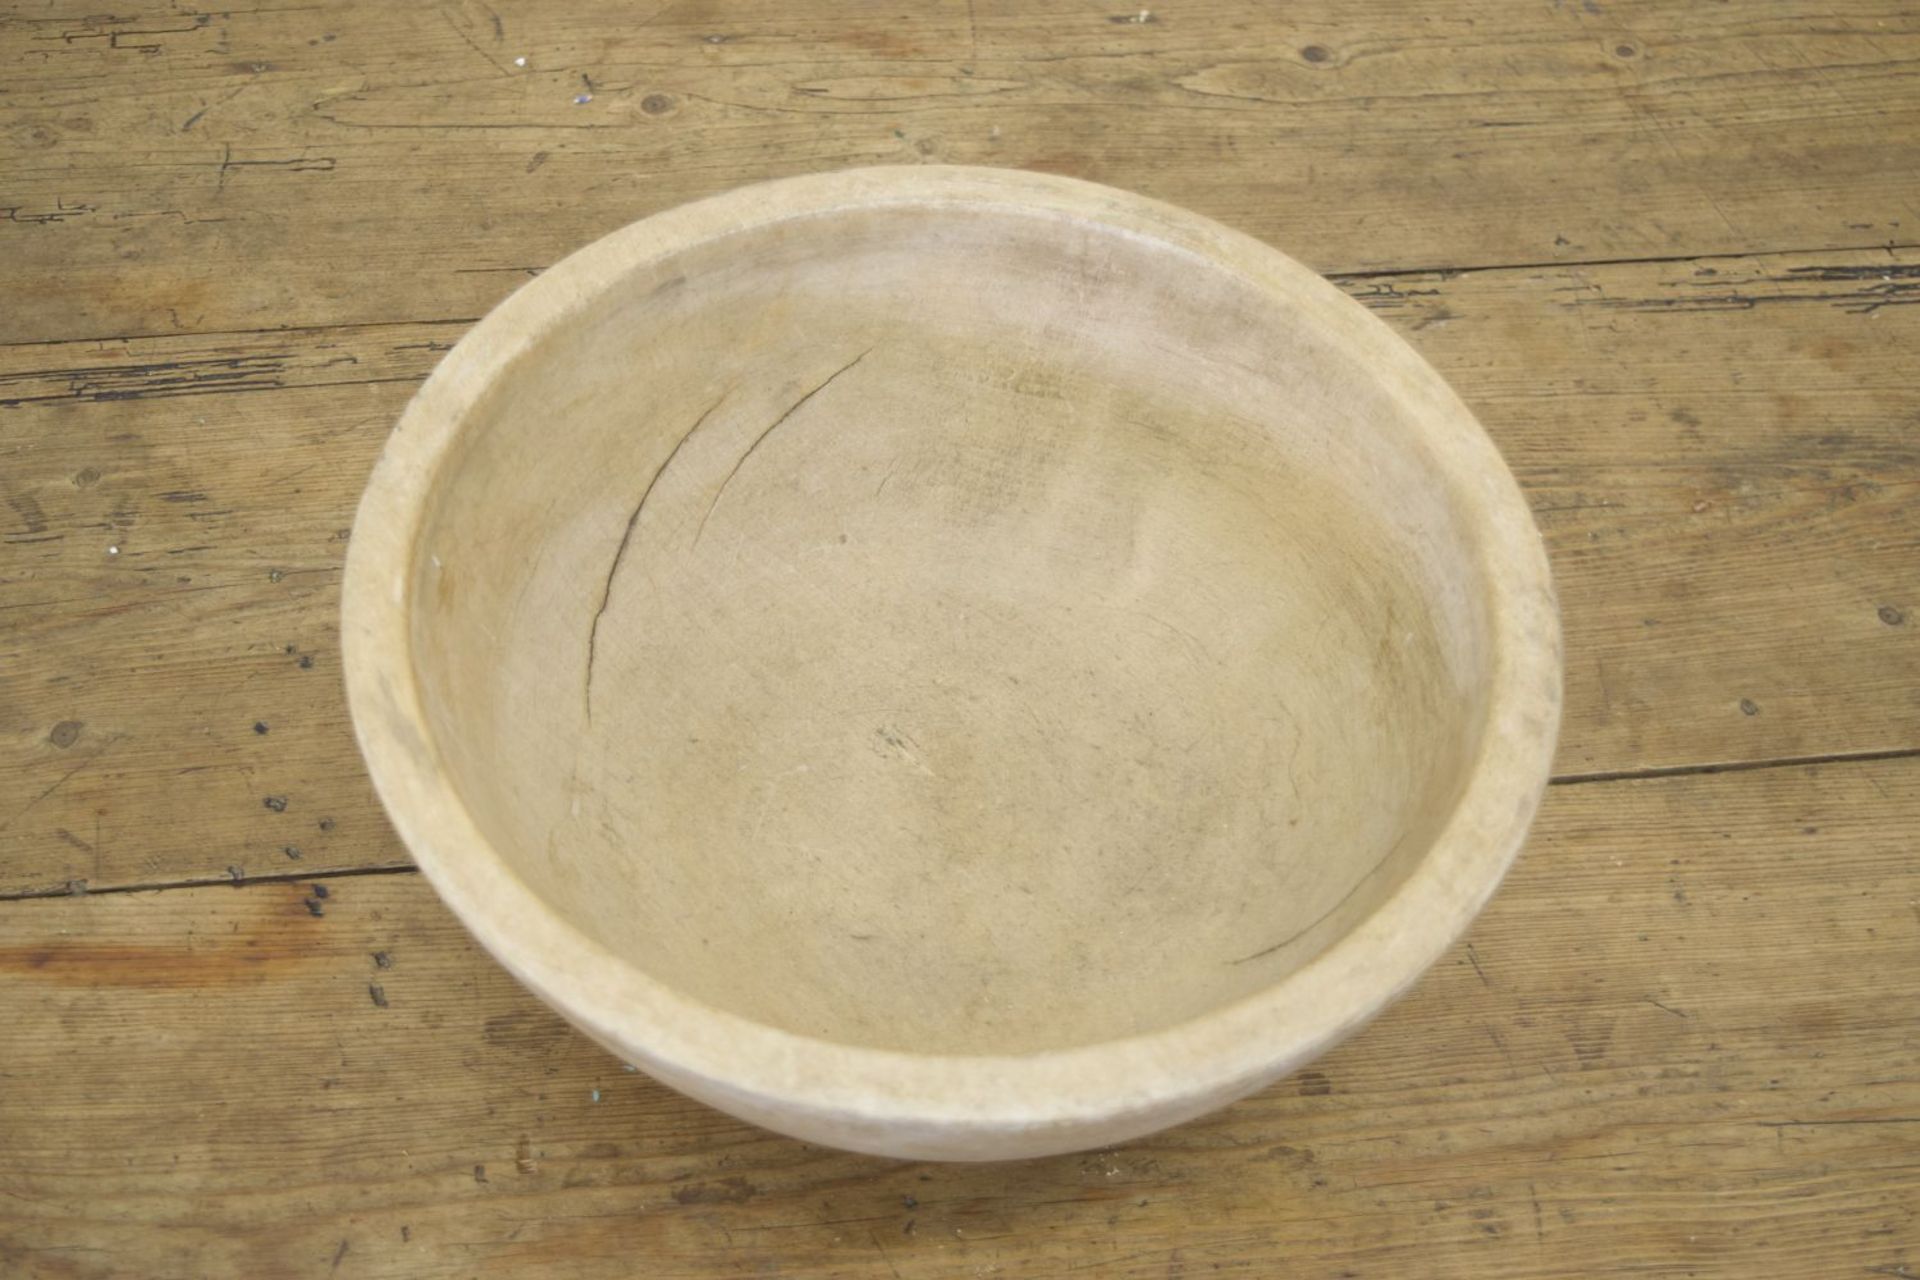 19TH-CENTURY SYCAMORE TREEN BUTTER BOWL - Image 2 of 2